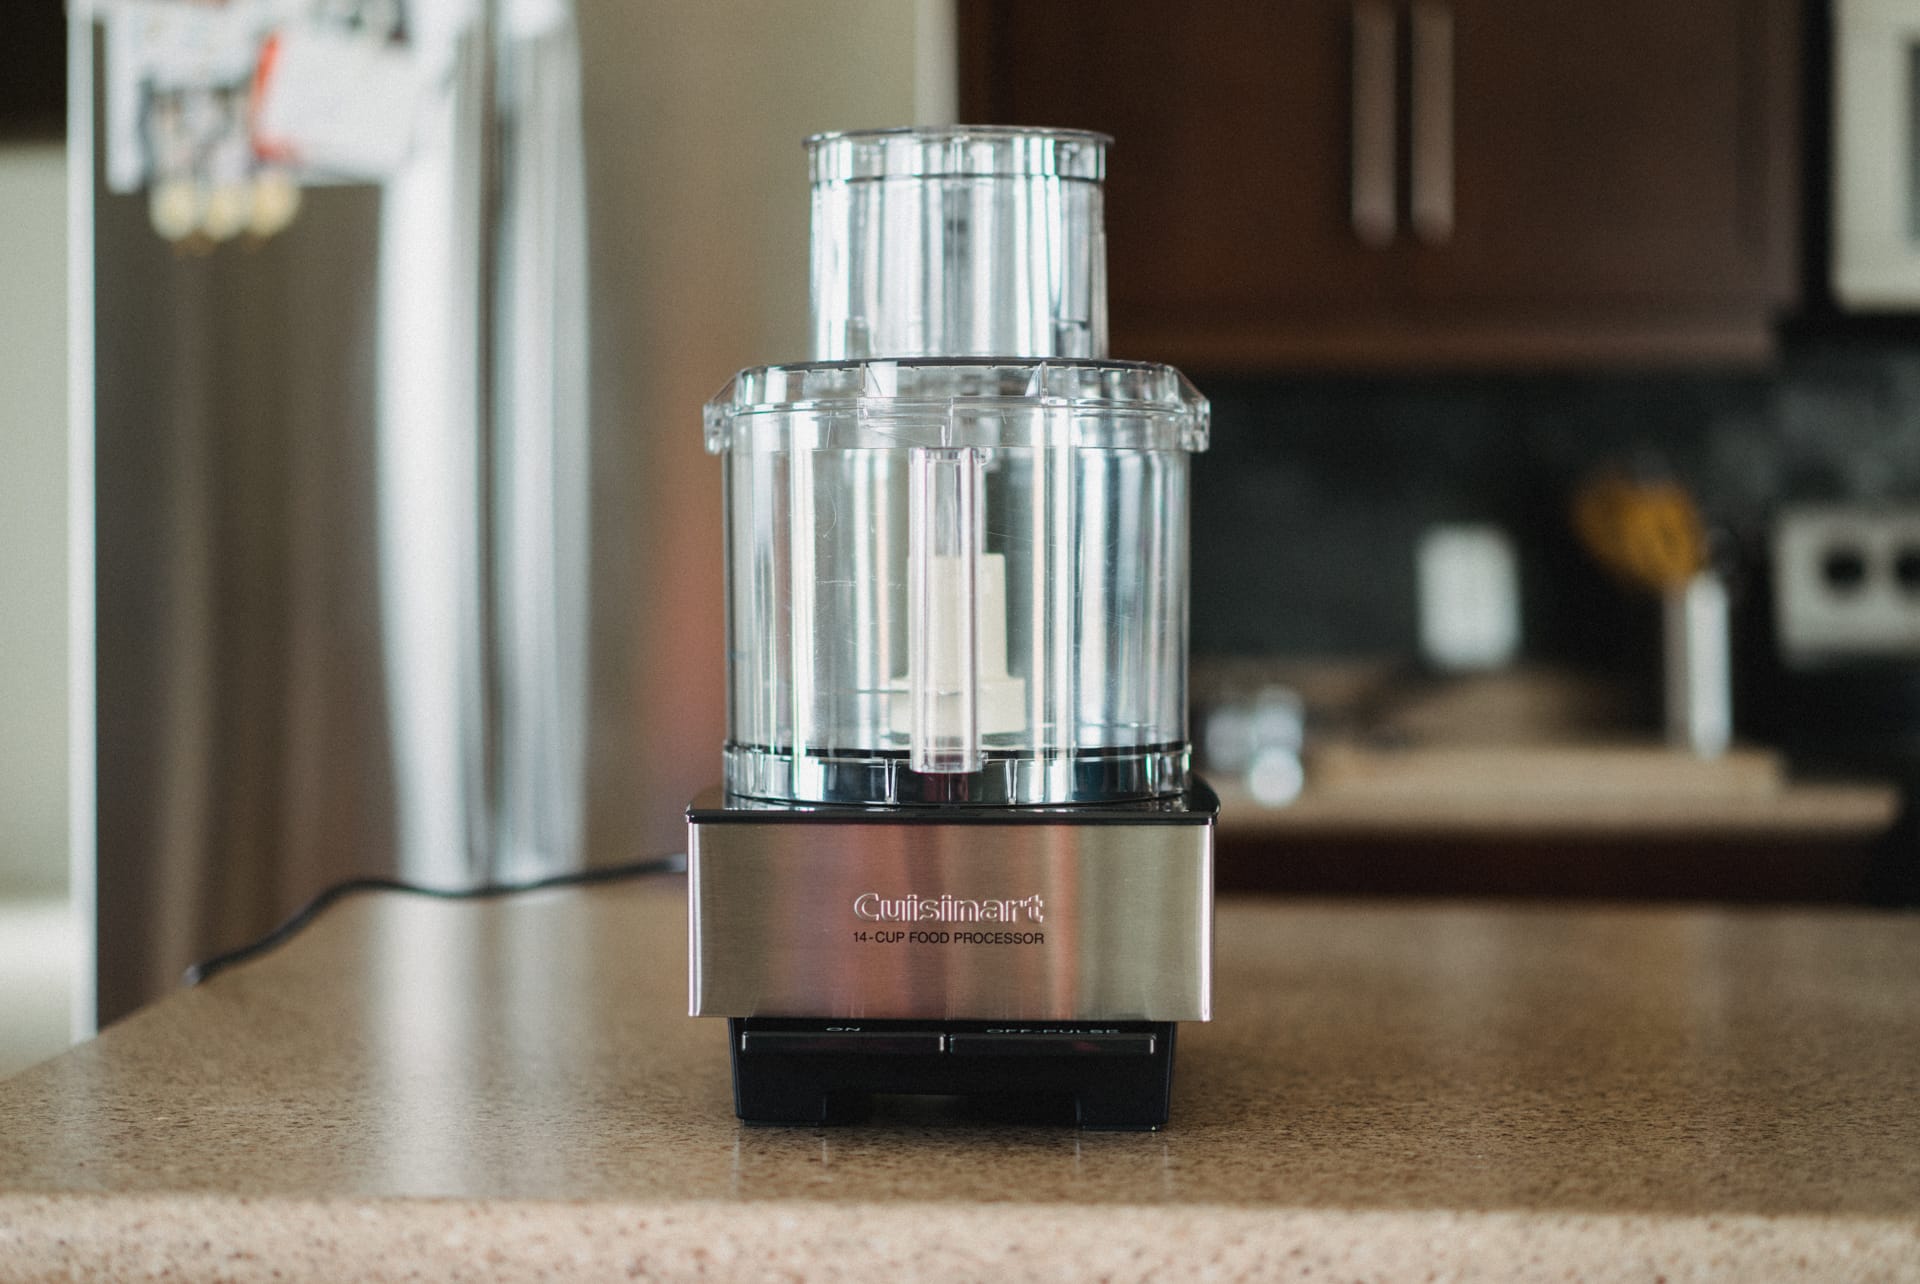 https://storables.com/wp-content/uploads/2023/07/cuisinart-14-cup-food-processor-how-to-use-1690718771.jpeg